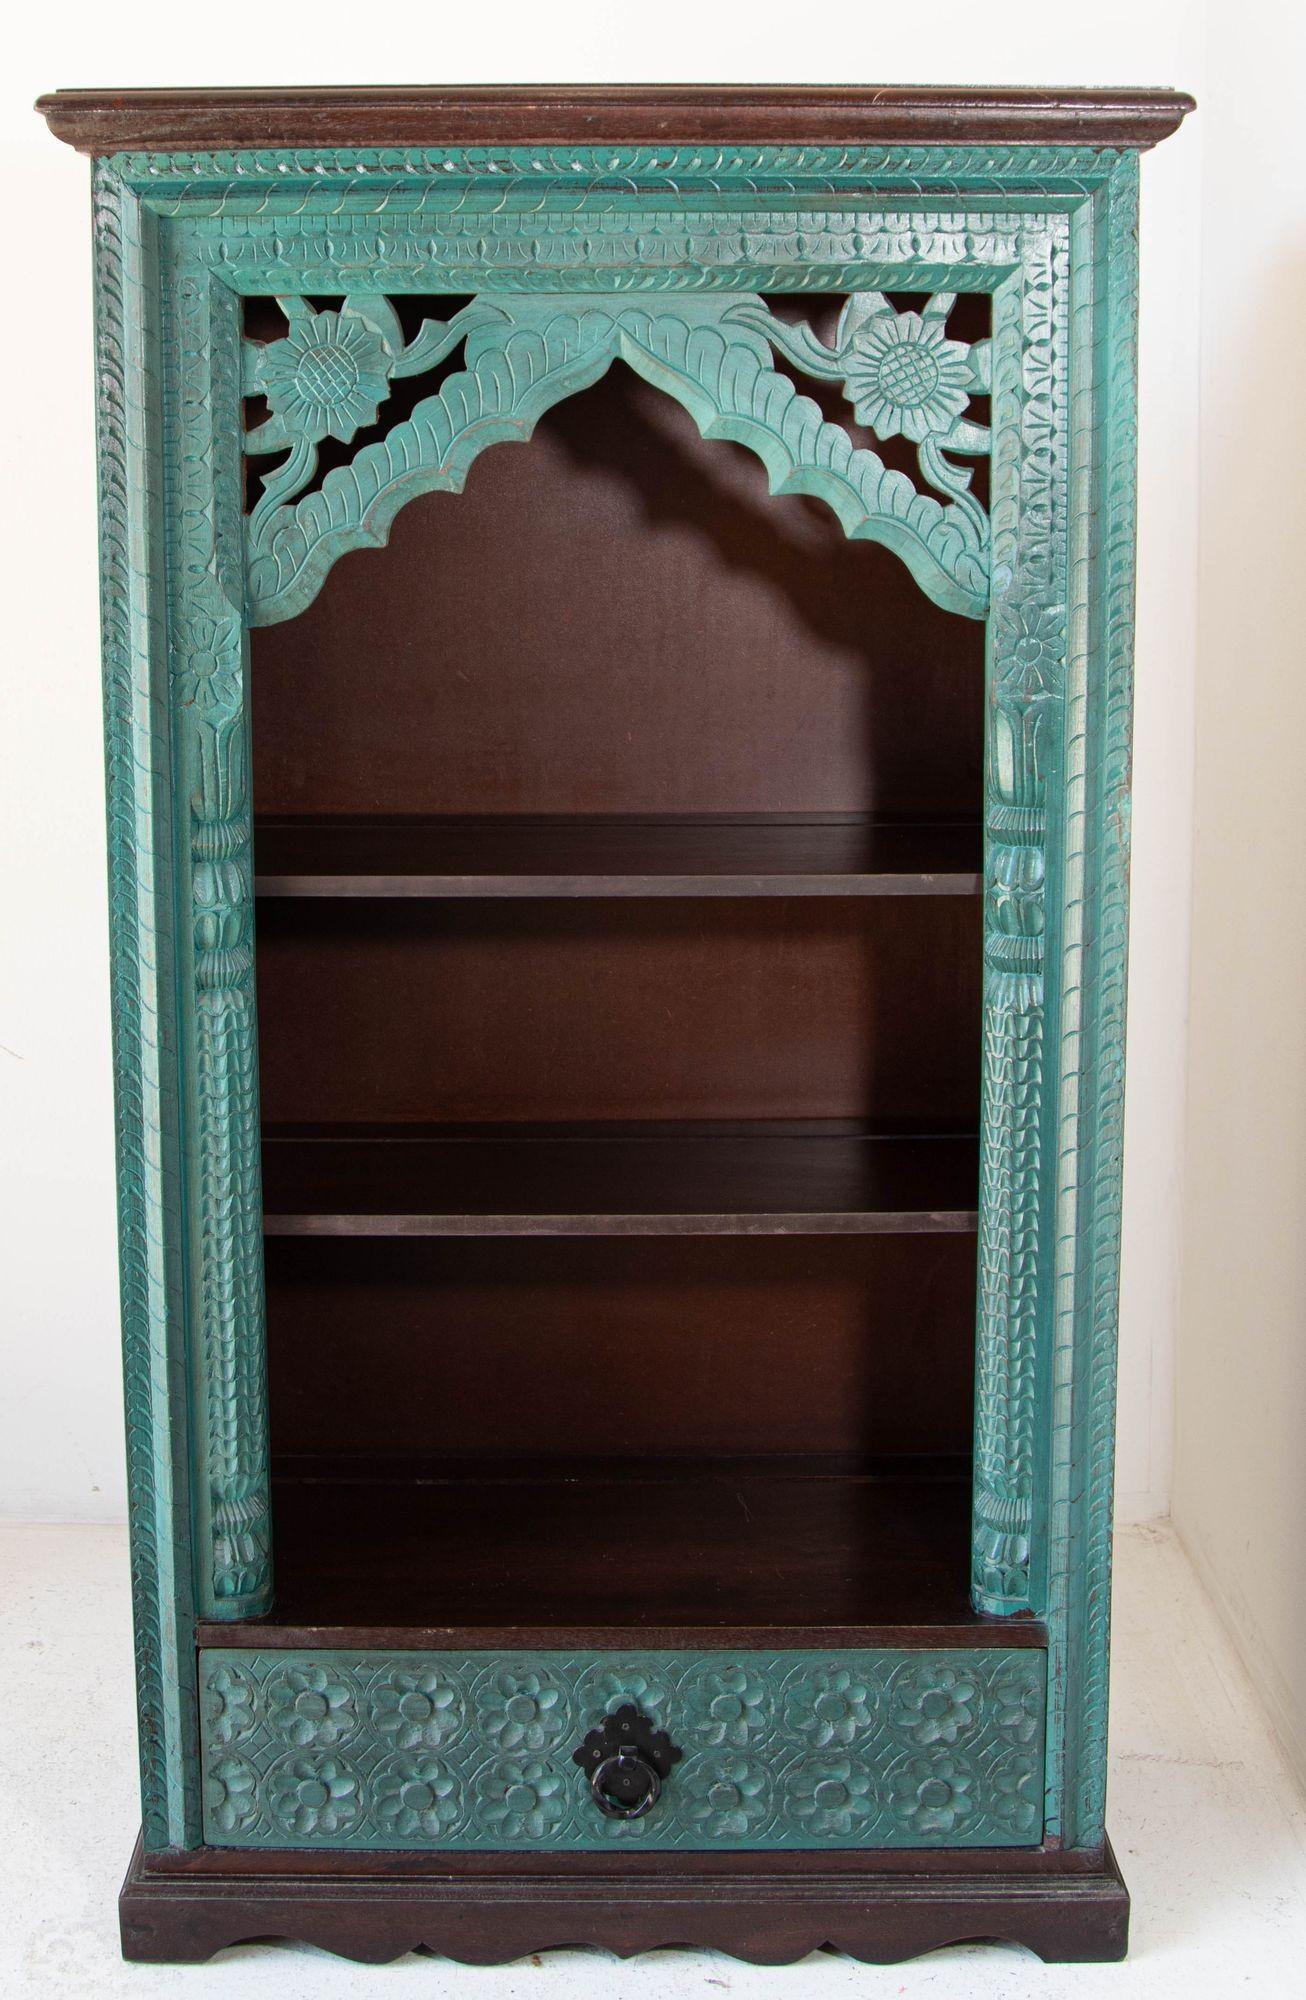 Hand-Carved Arch Bookshelf Wooden Cabinet in Rustic Blue In Good Condition For Sale In North Hollywood, CA